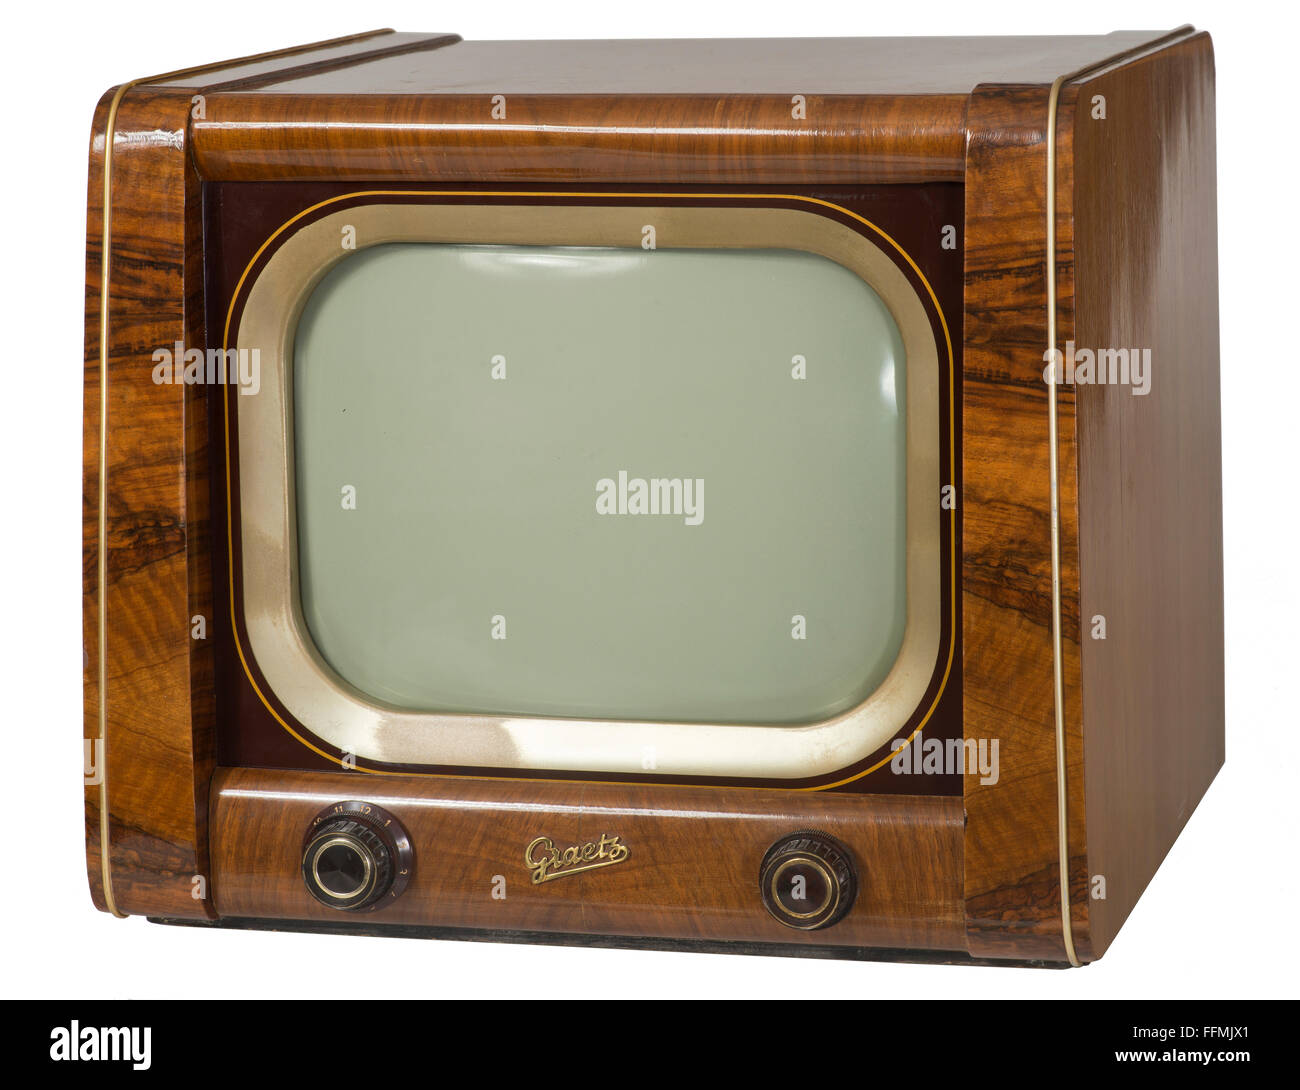 broadcast,television,Graetz tabletop television set F 6,36 centimeter screen size,exotic wooden chassis,Germany,1953,black-white,very early monochrome television set,TV history,TV device,Made in Germany,economic miracle,economic miracles,consumer good,consumer item,consumer goods,consumer items,clipping,cut out,cut-out,cut-outs,engineering,technologies,history of technology,1950s,television set,TV set,TV,television sets,TV sets,TVs,broadcast receiver,broadcast receivers,broadcast electronics,electric appliance,electrical devi,Additional-Rights-Clearences-Not Available Stock Photo